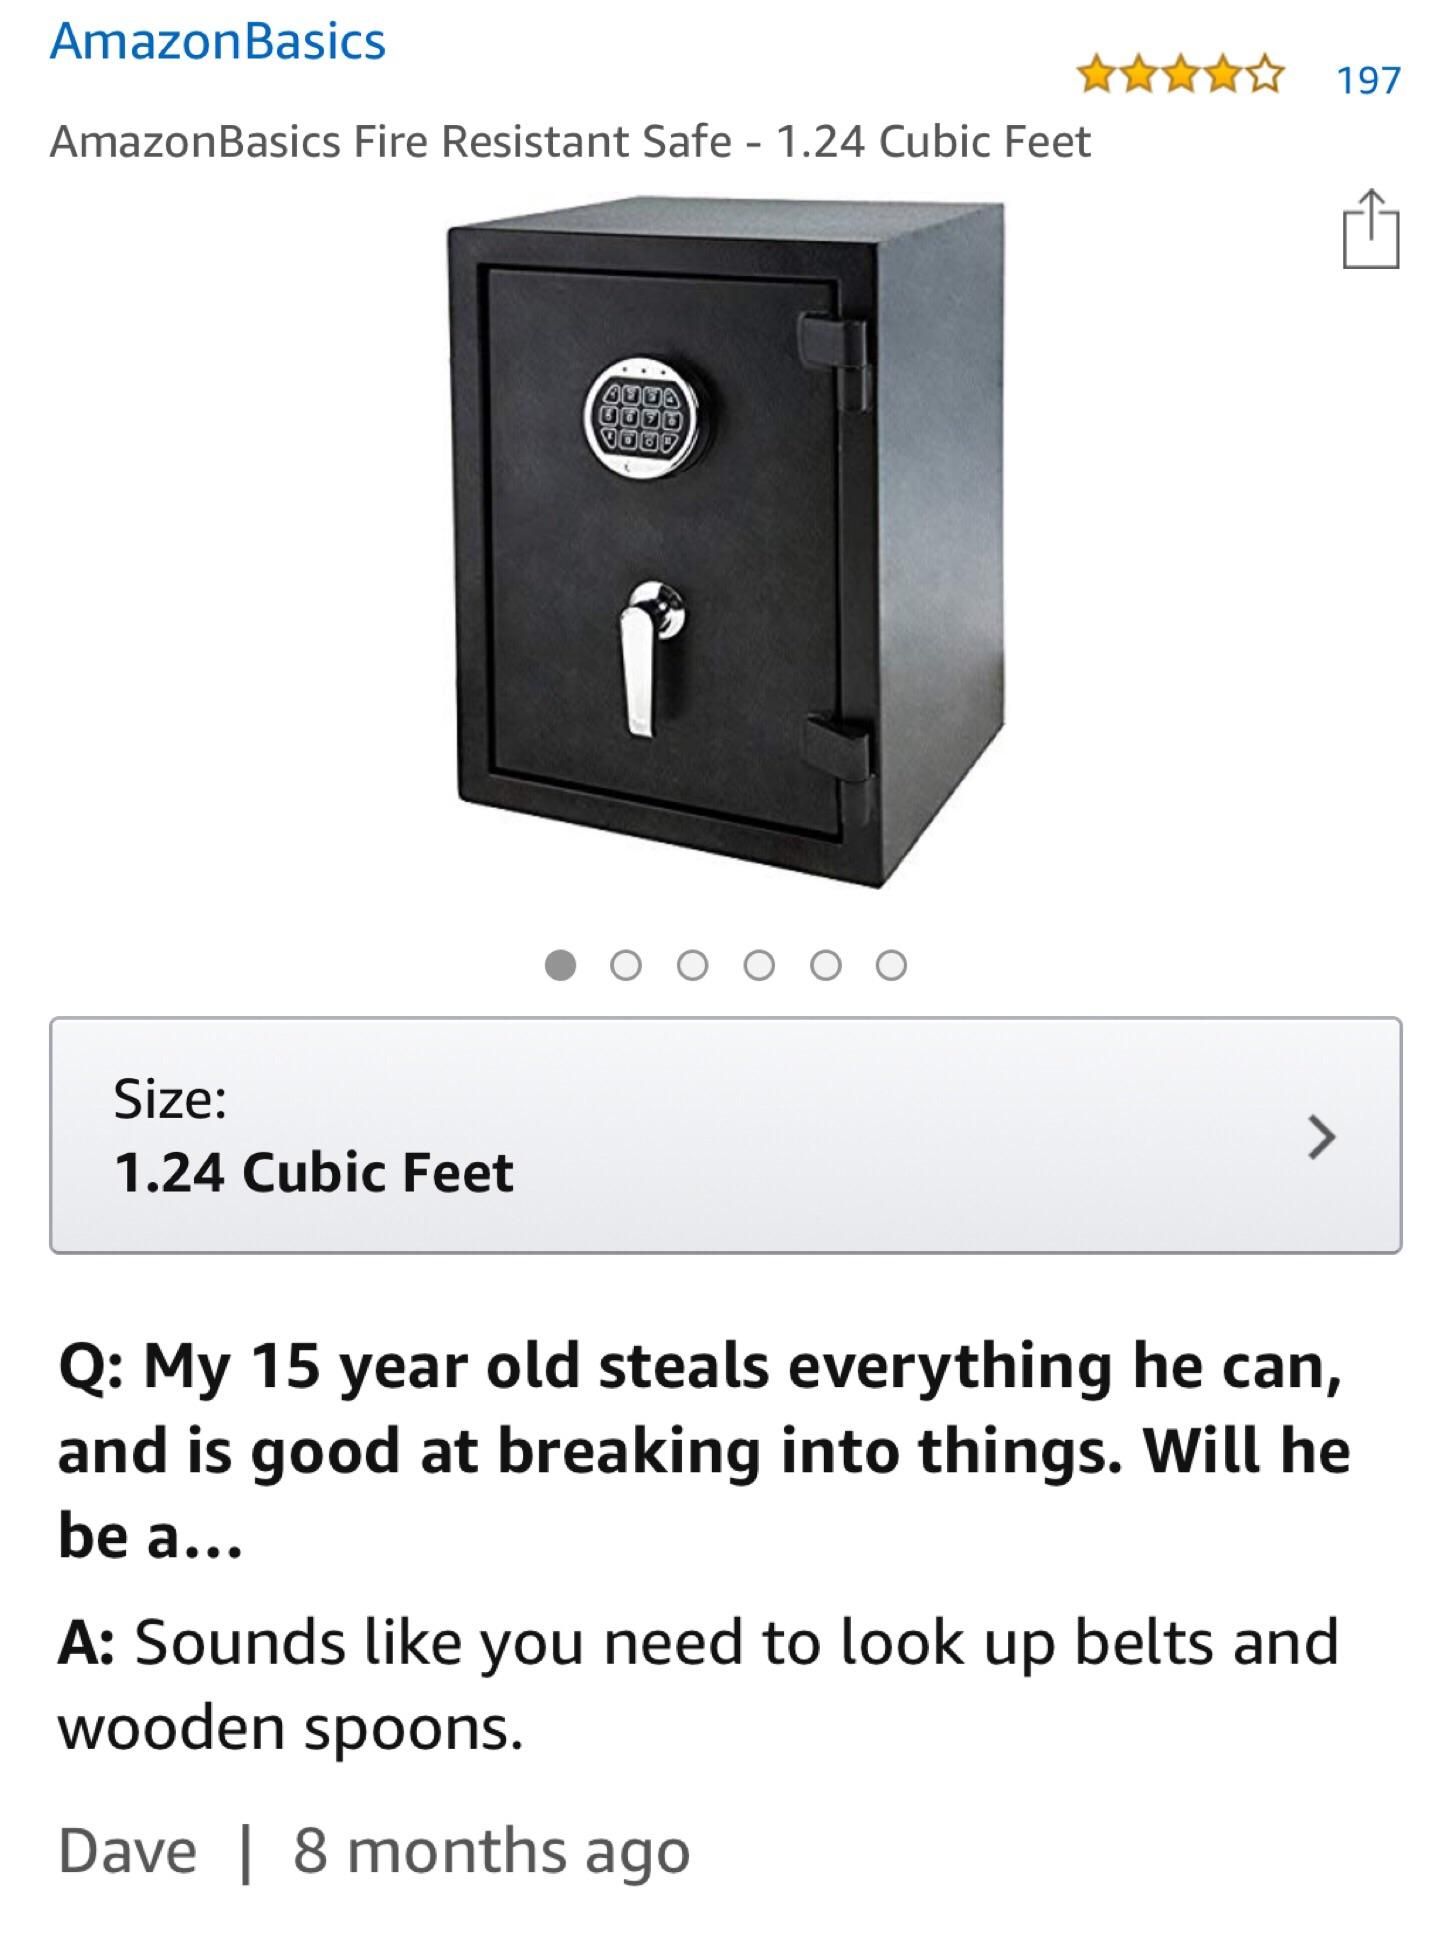 Shopping for a safe this morning and came across this interesting Q&A: